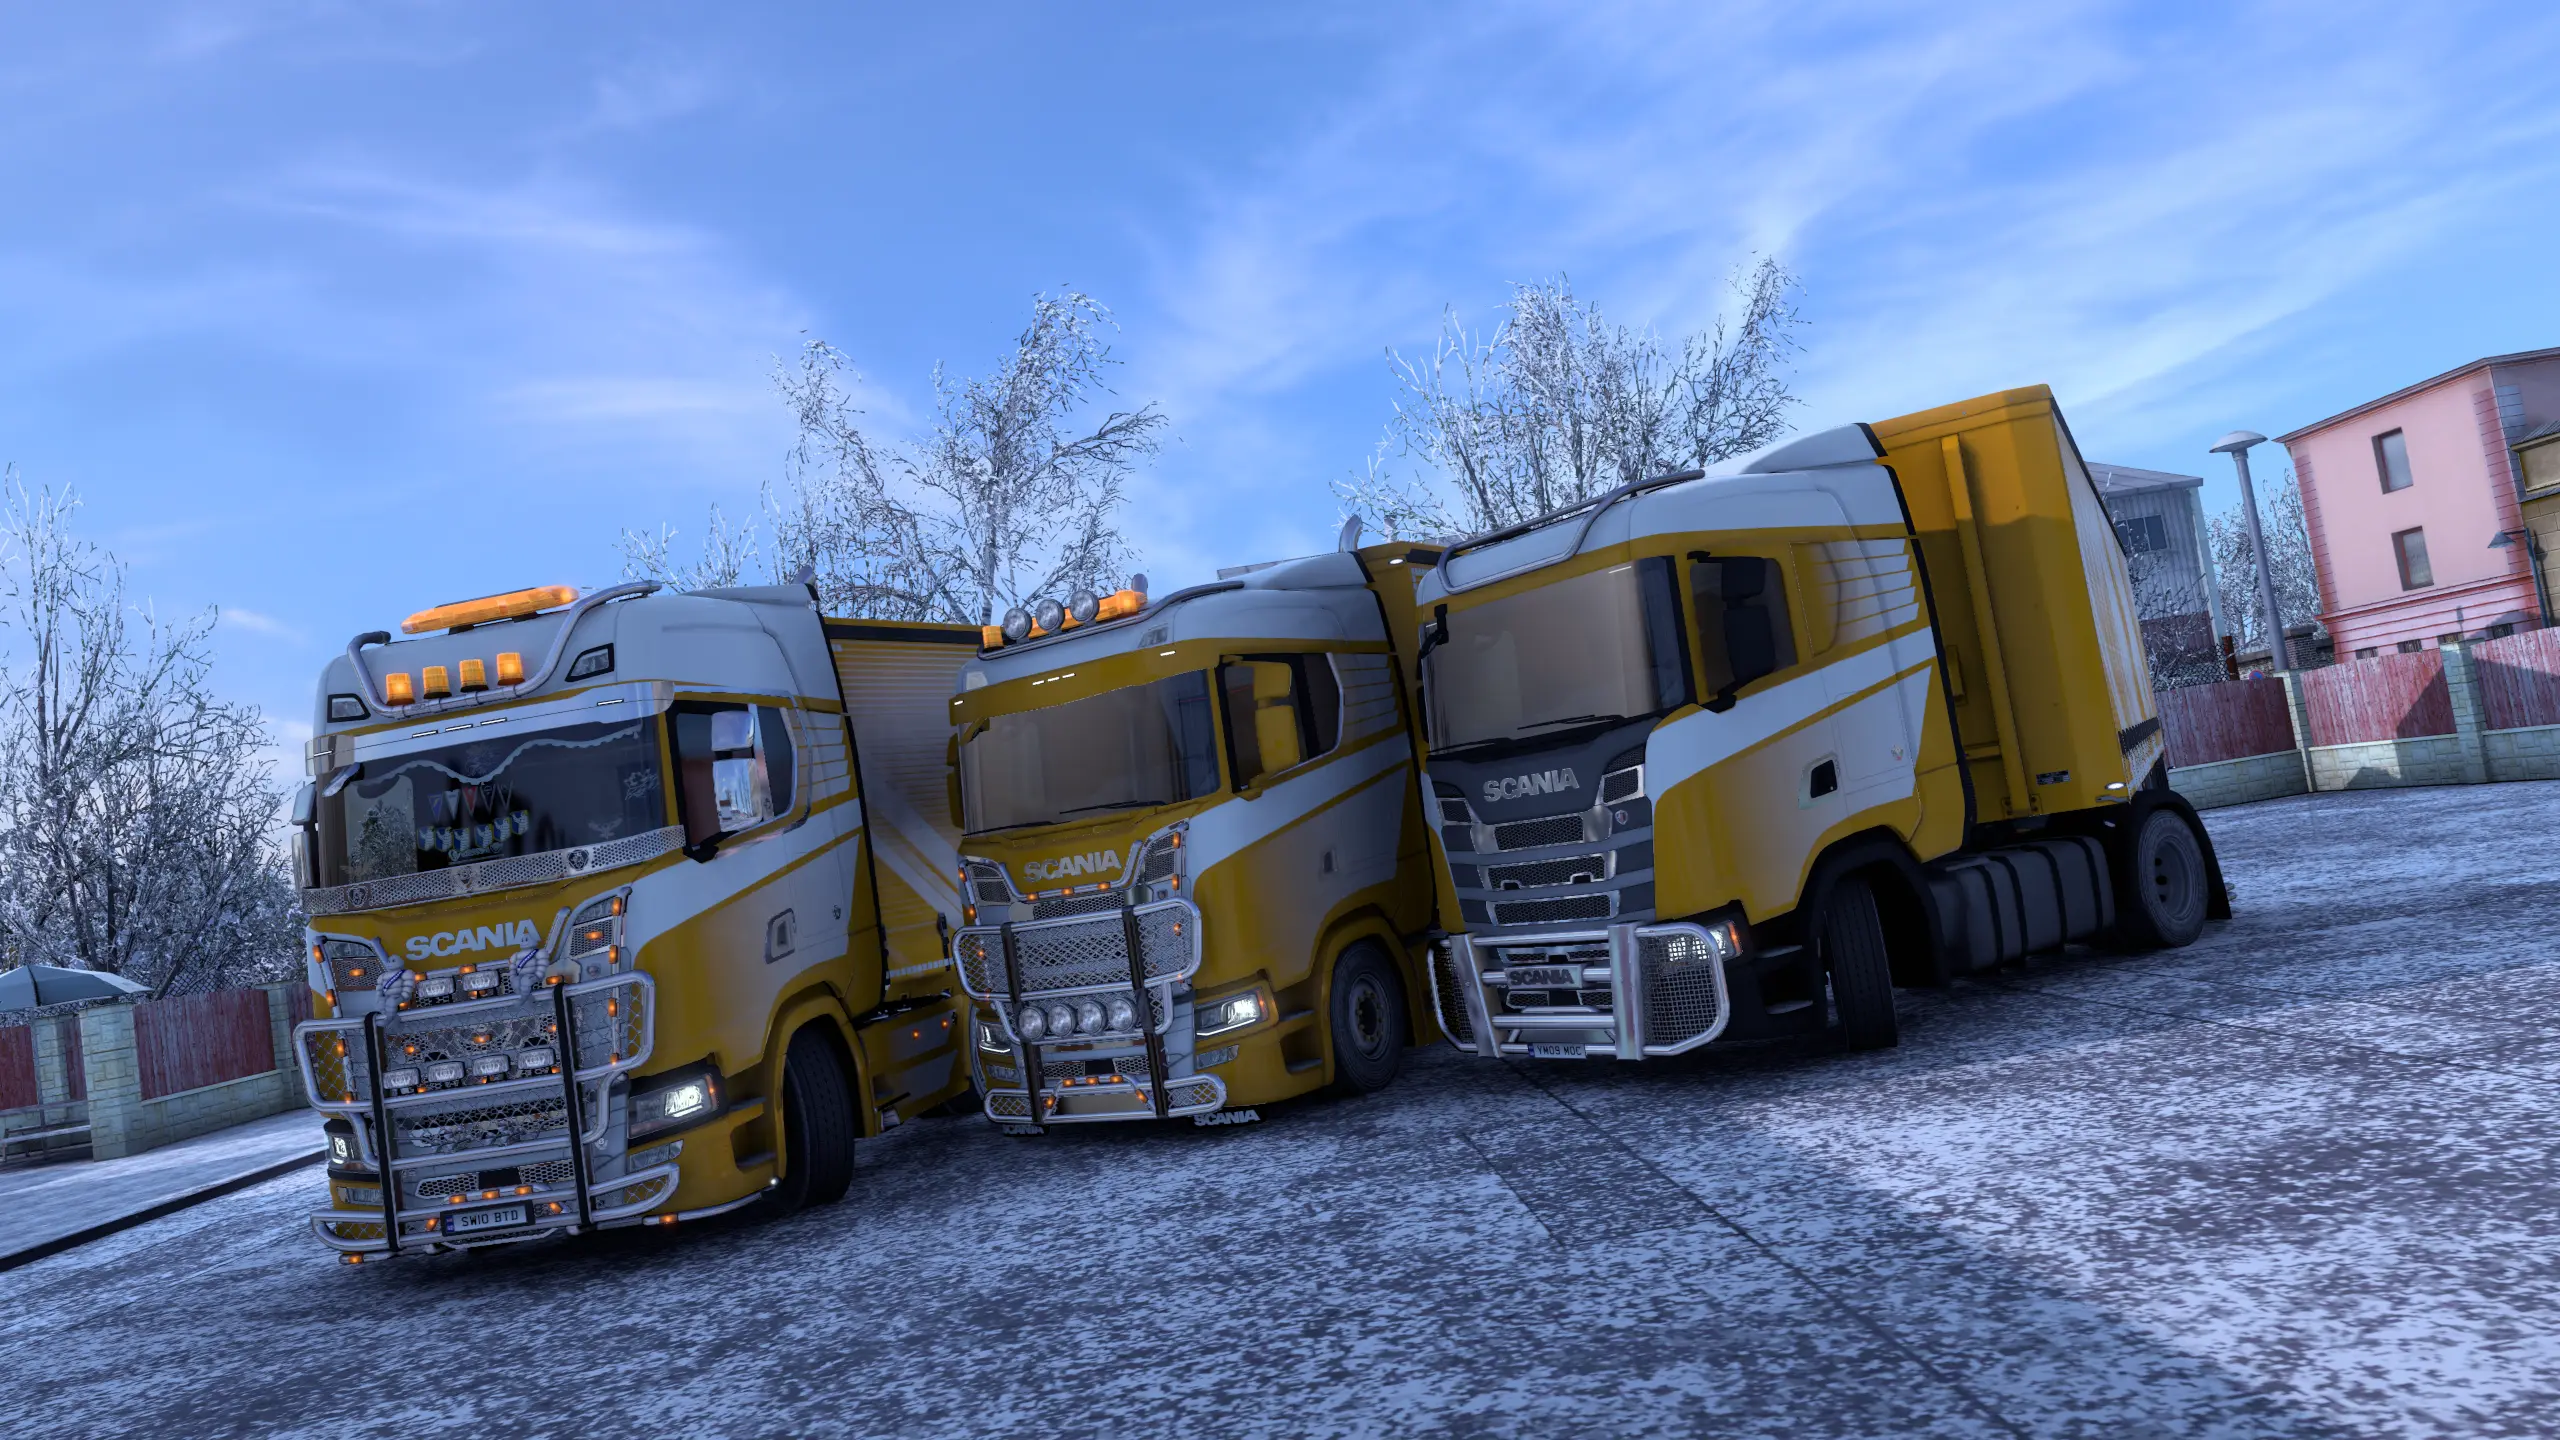 Two GPE trucks in TruckersMP talking a photo next to the fuel station